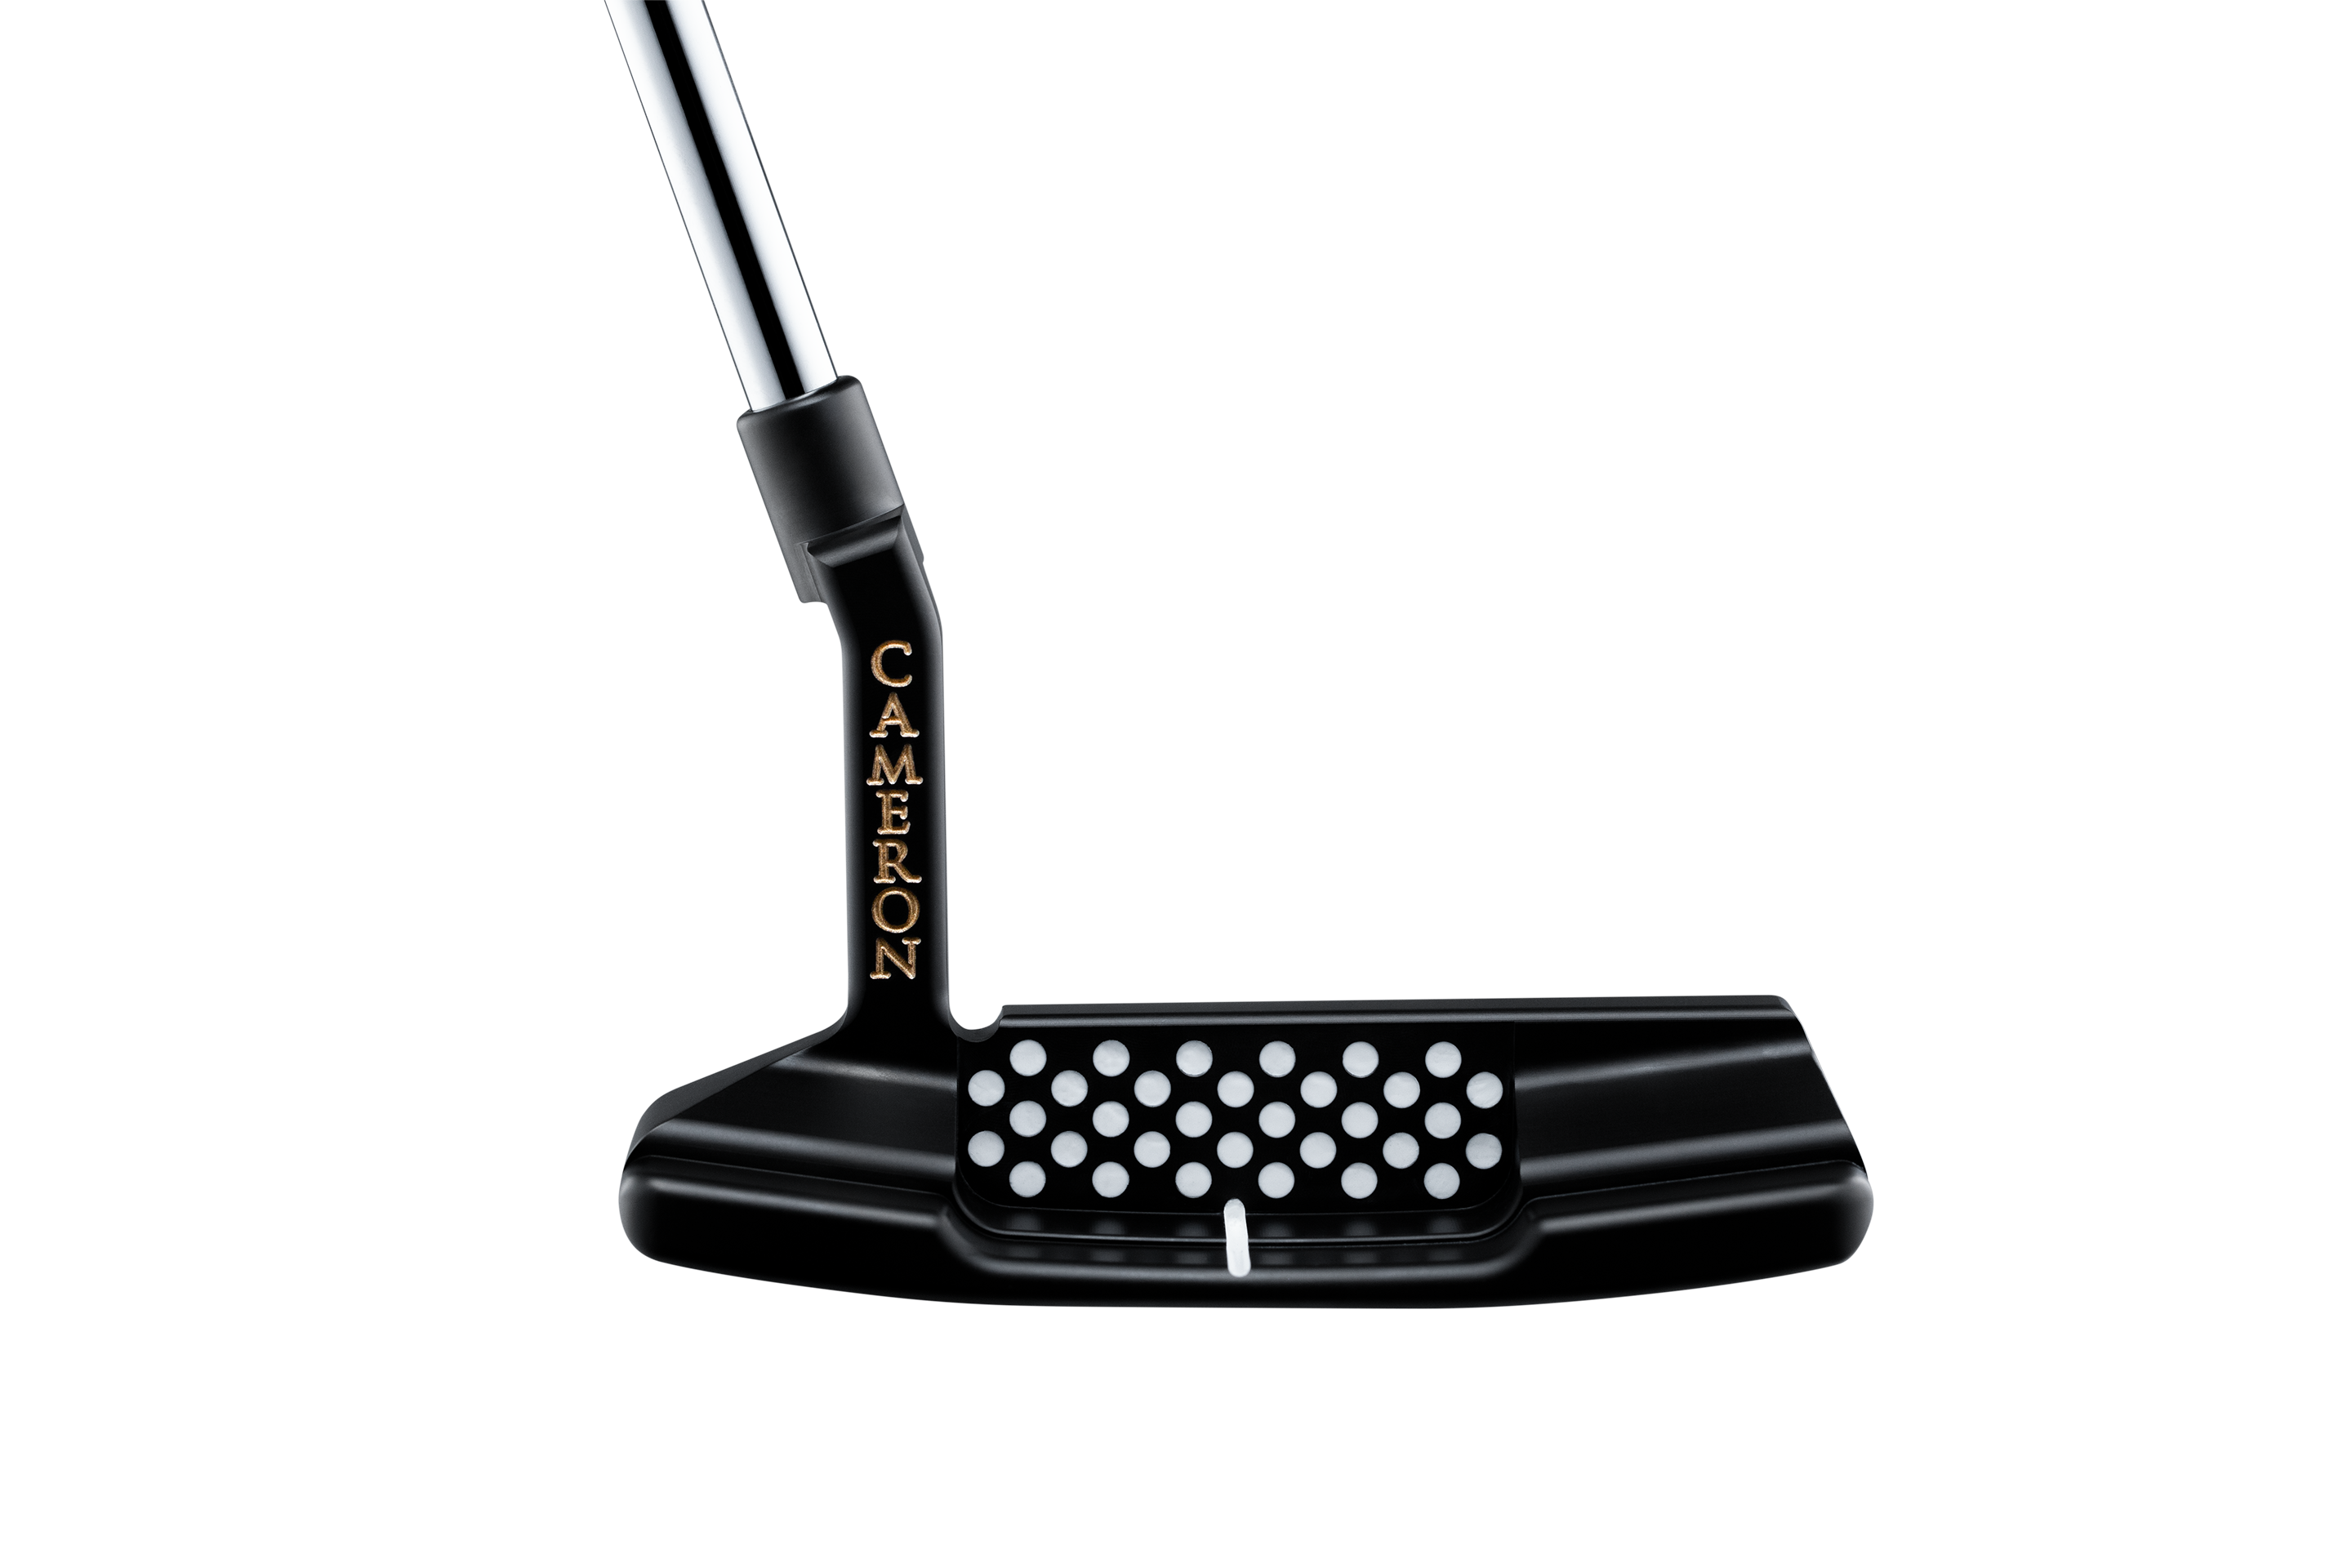 FIRST LOOK: Scotty Cameron Teryllium Putters